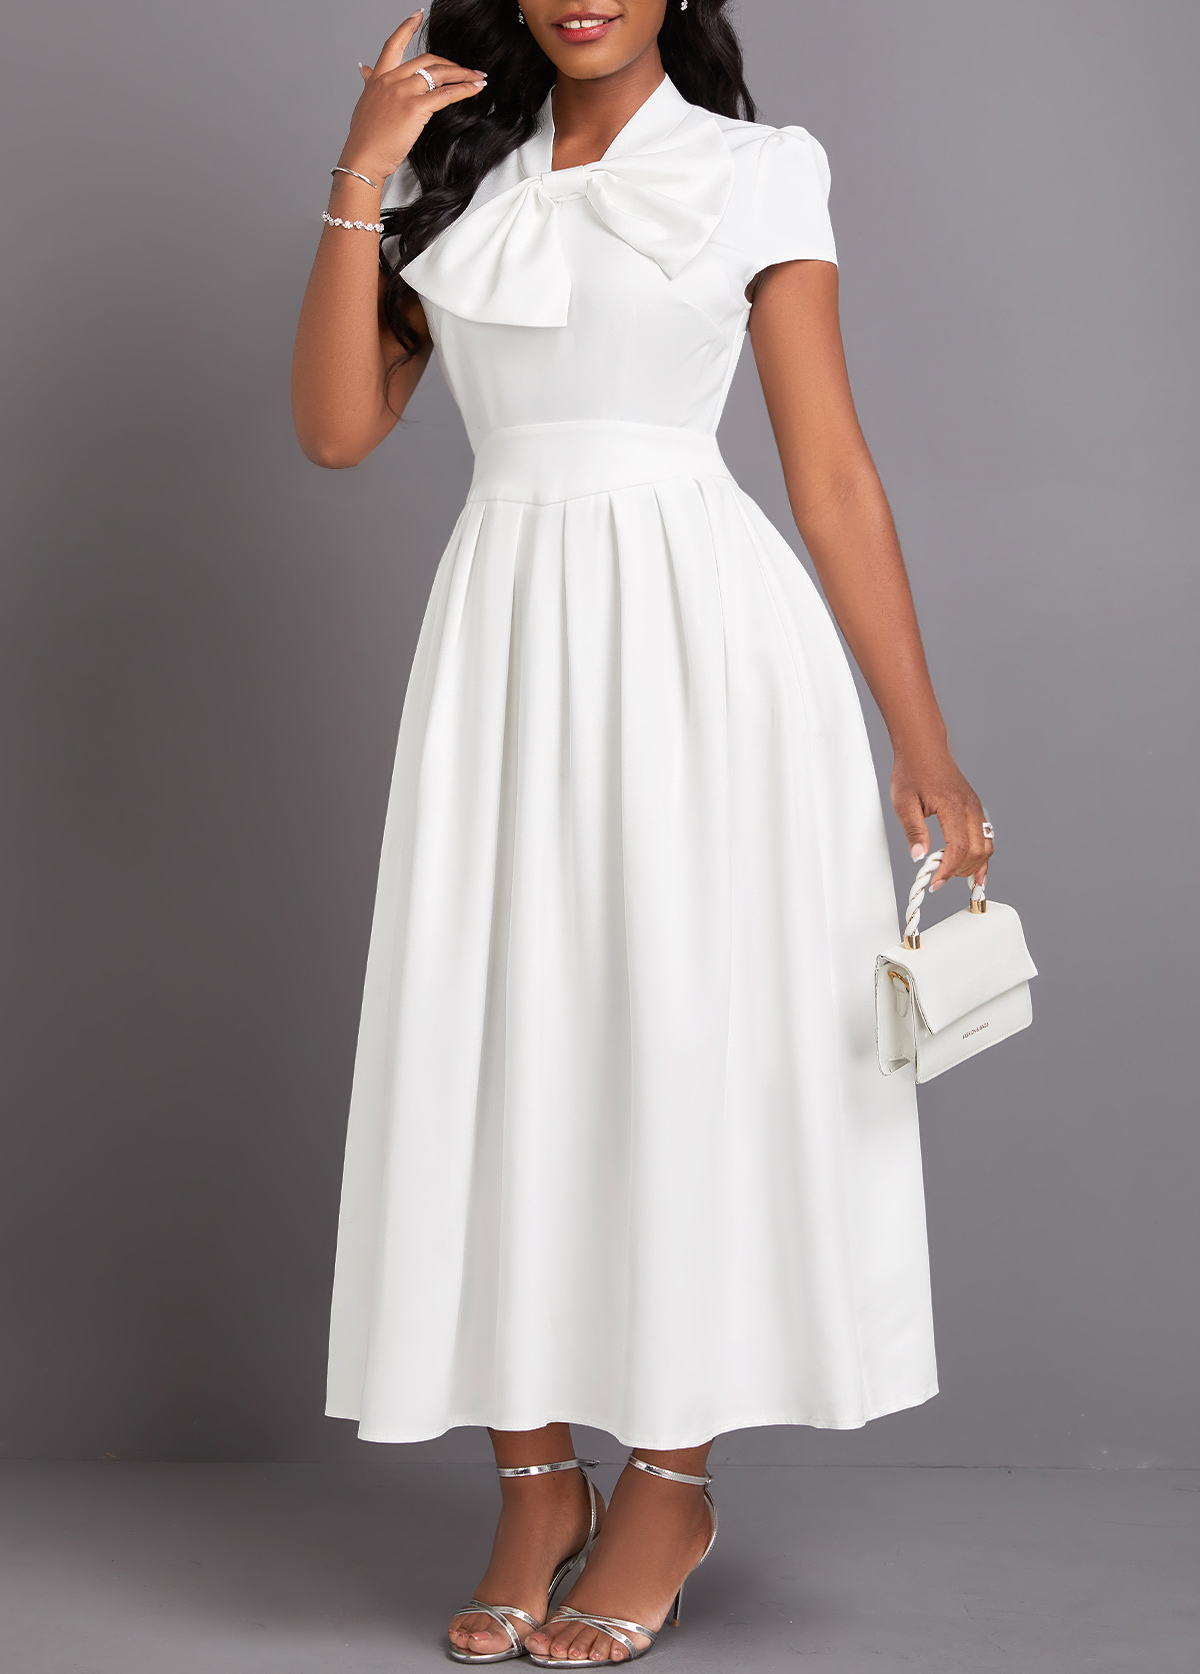 White Bowknot Short Sleeve Stand Collar Dress